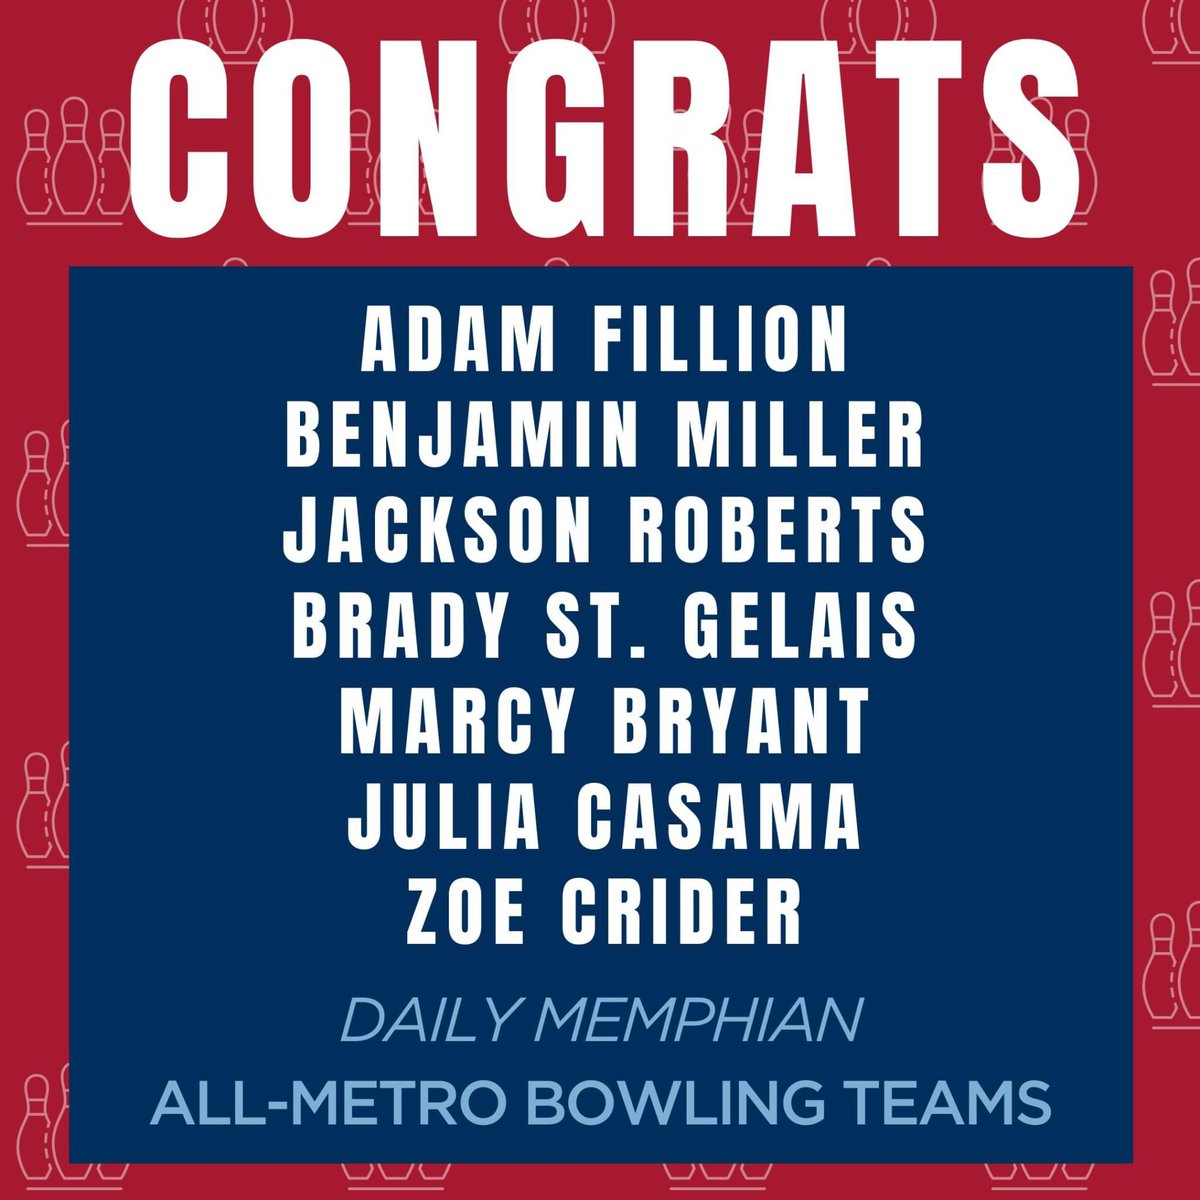 Our SBA Bowling Team members took home several Daily Memphian awards this year! Congratulations on an amazing season! @johnvarlas